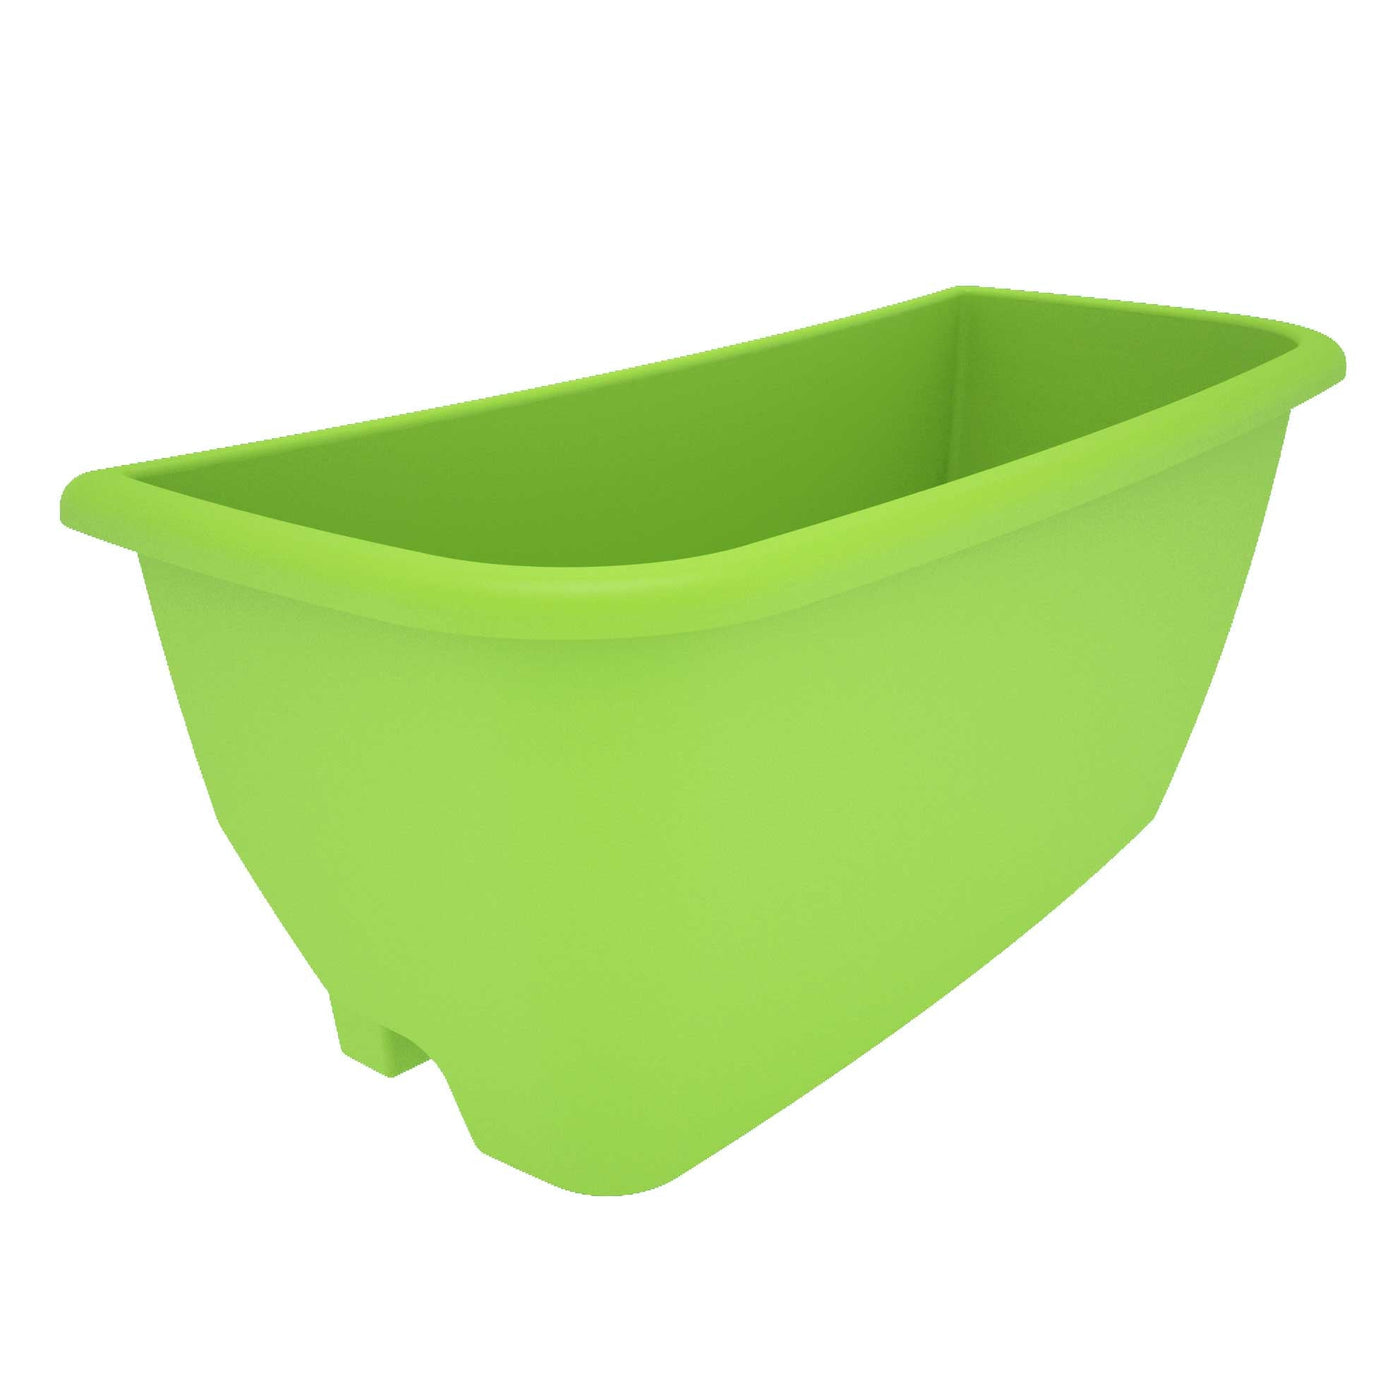 bright lime green water butt planter with capillary mat for Rainwater Terrace water butt - fits all  sizes